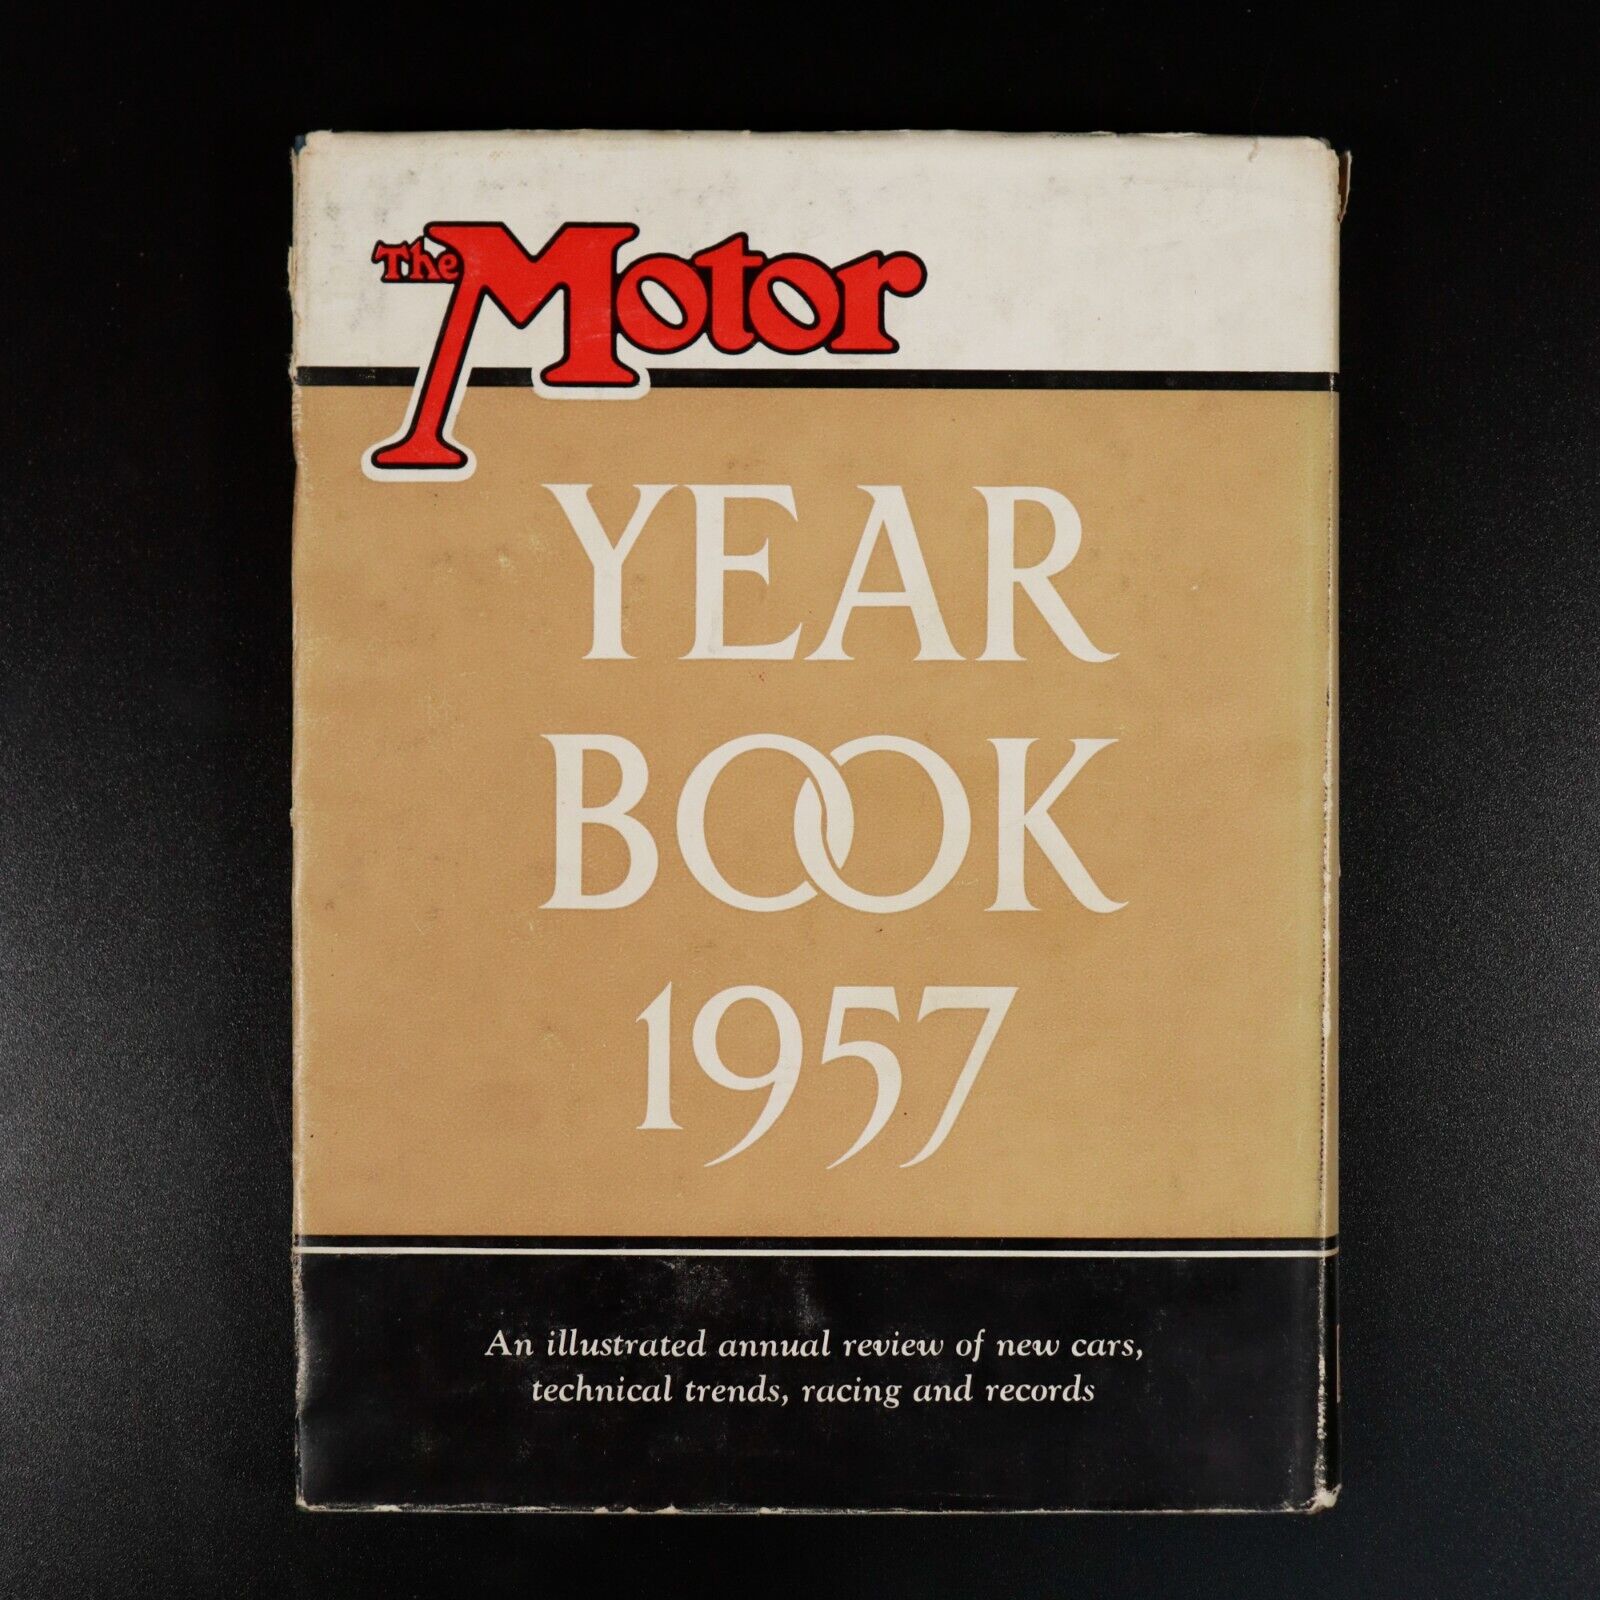 1957 The Motor Year Book For 1957 Vintage Automotive Book Car Racing